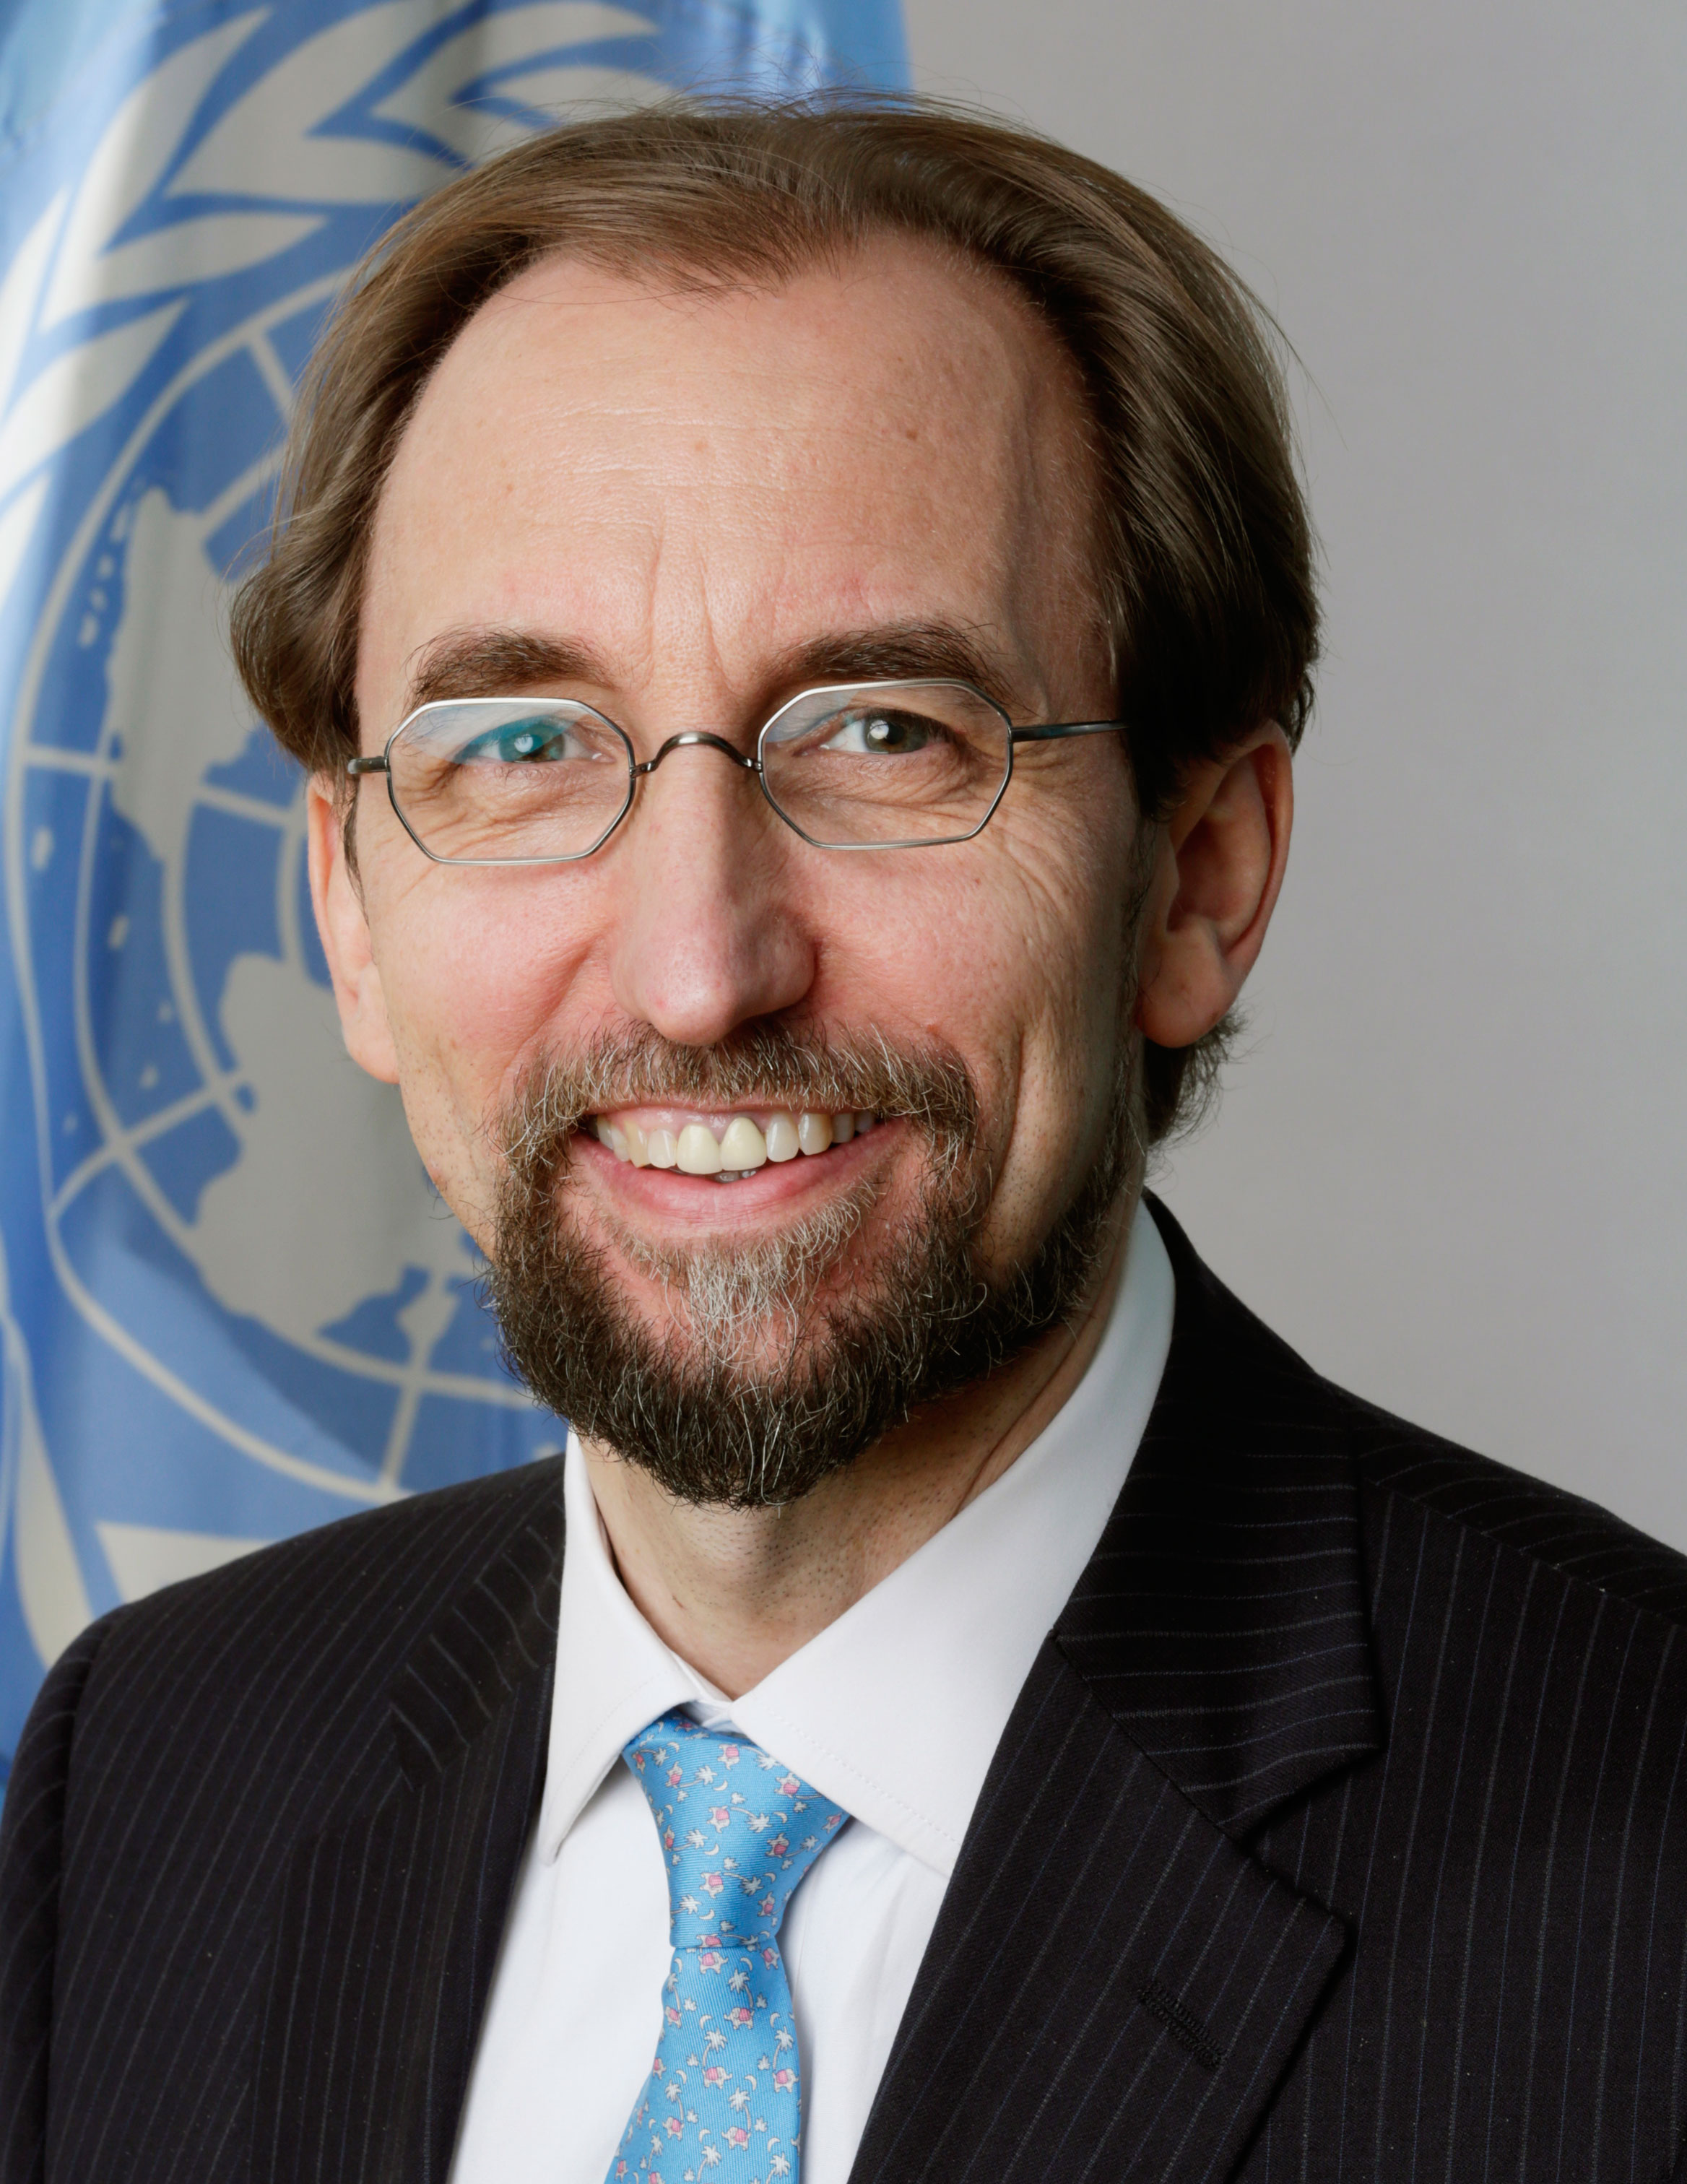 The UN High Commissioner for Human Rights Zeid Raad Ibn Al-Hussein